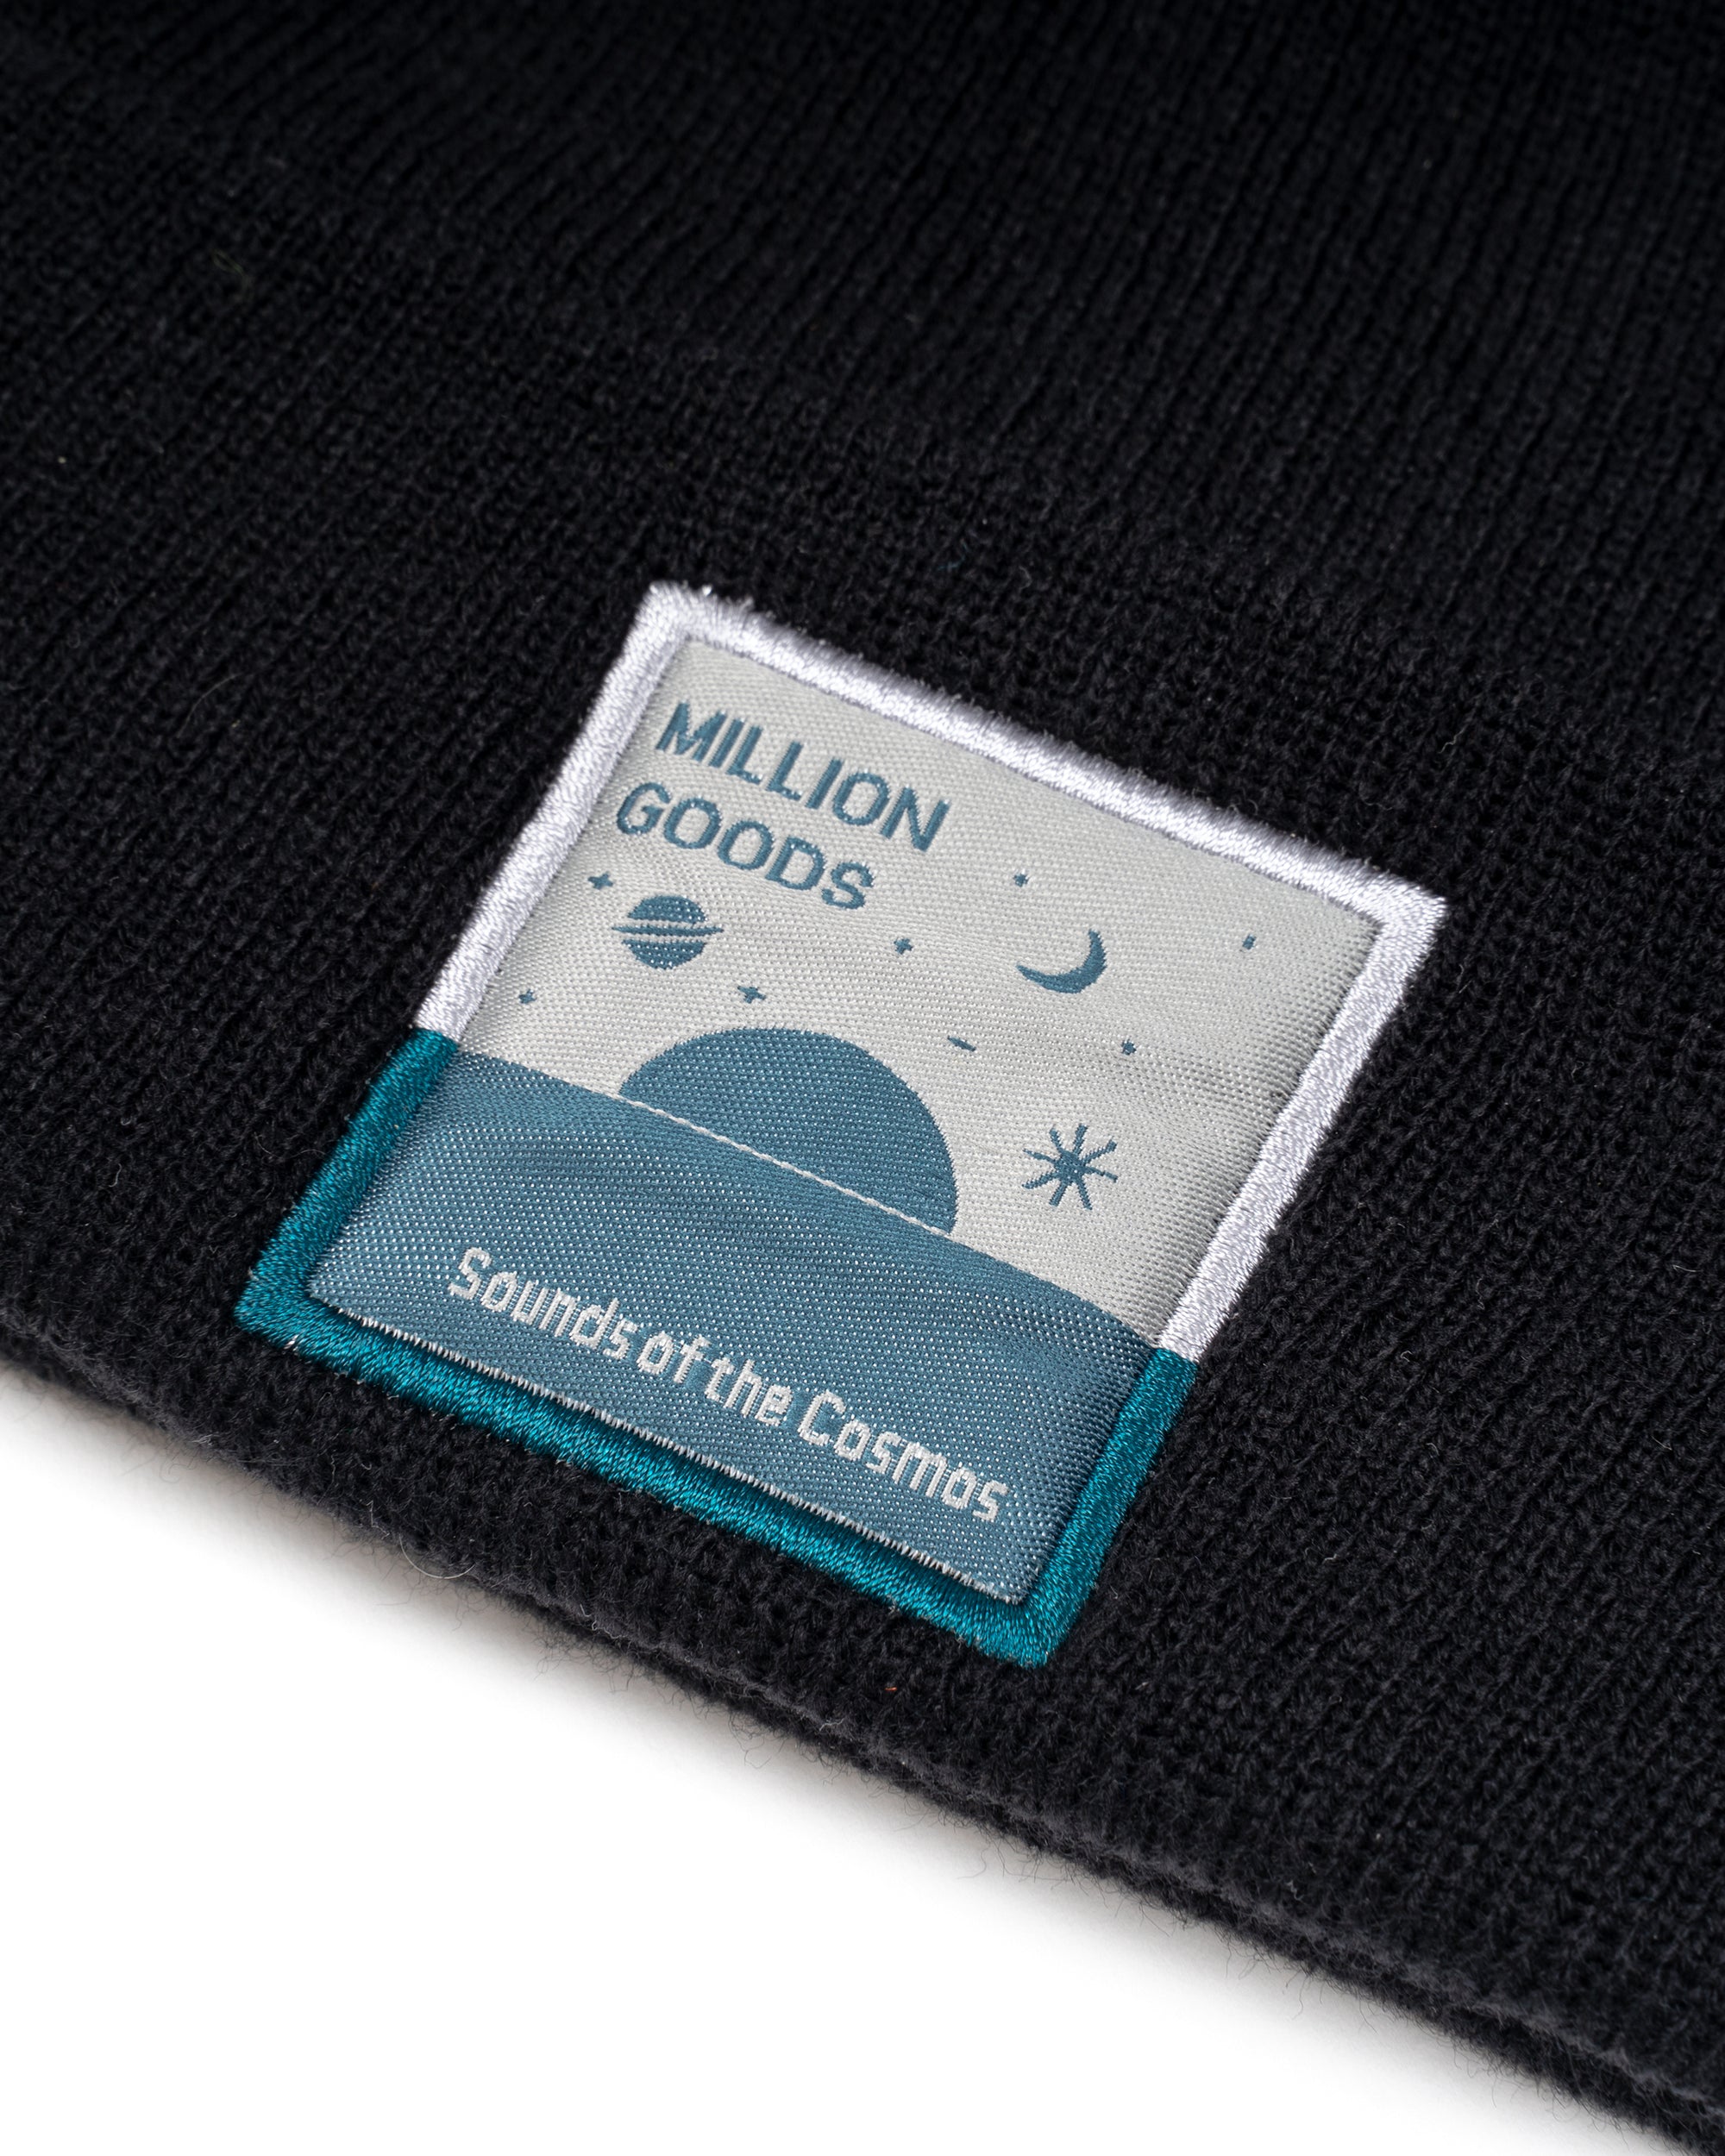 Sounds of the Cosmos Beanie